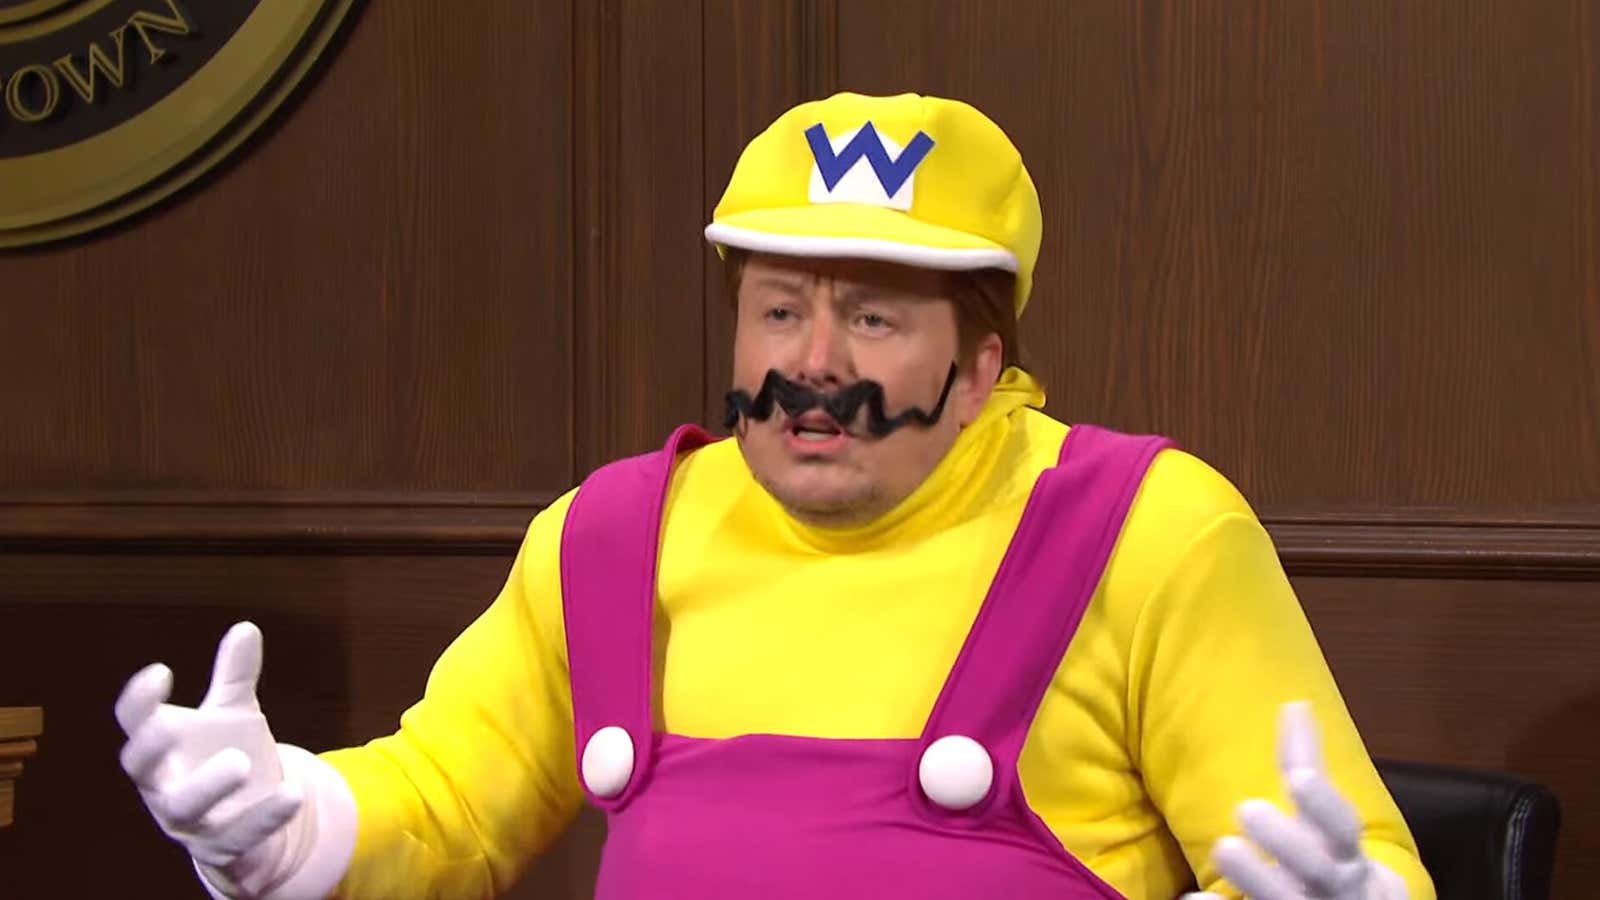 Elon Musk as Wario, from the Mario video game series.